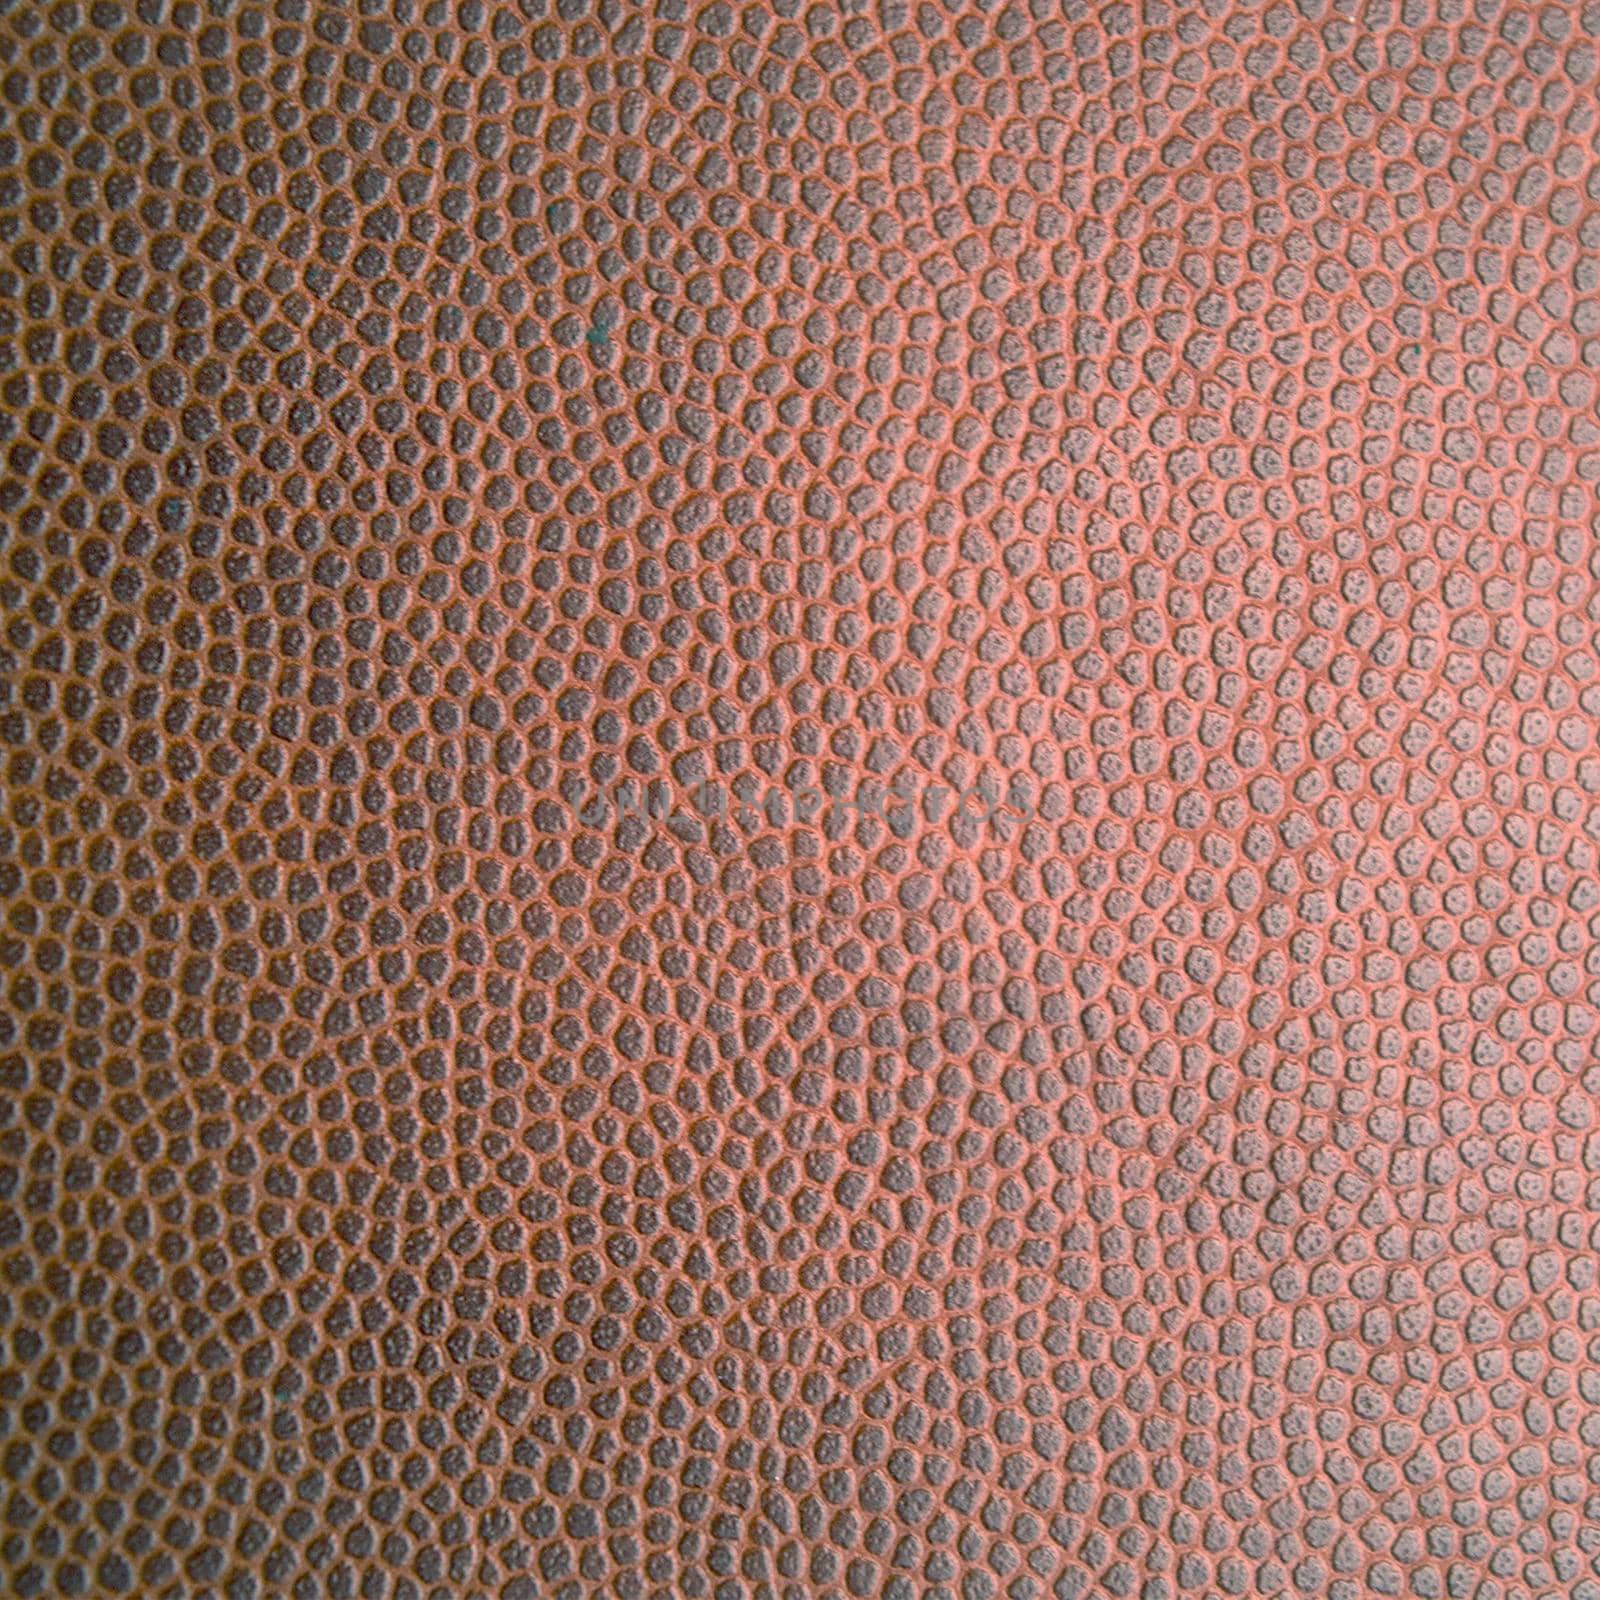 Artificial textured brown leather close-up.Texture or background by Mastak80